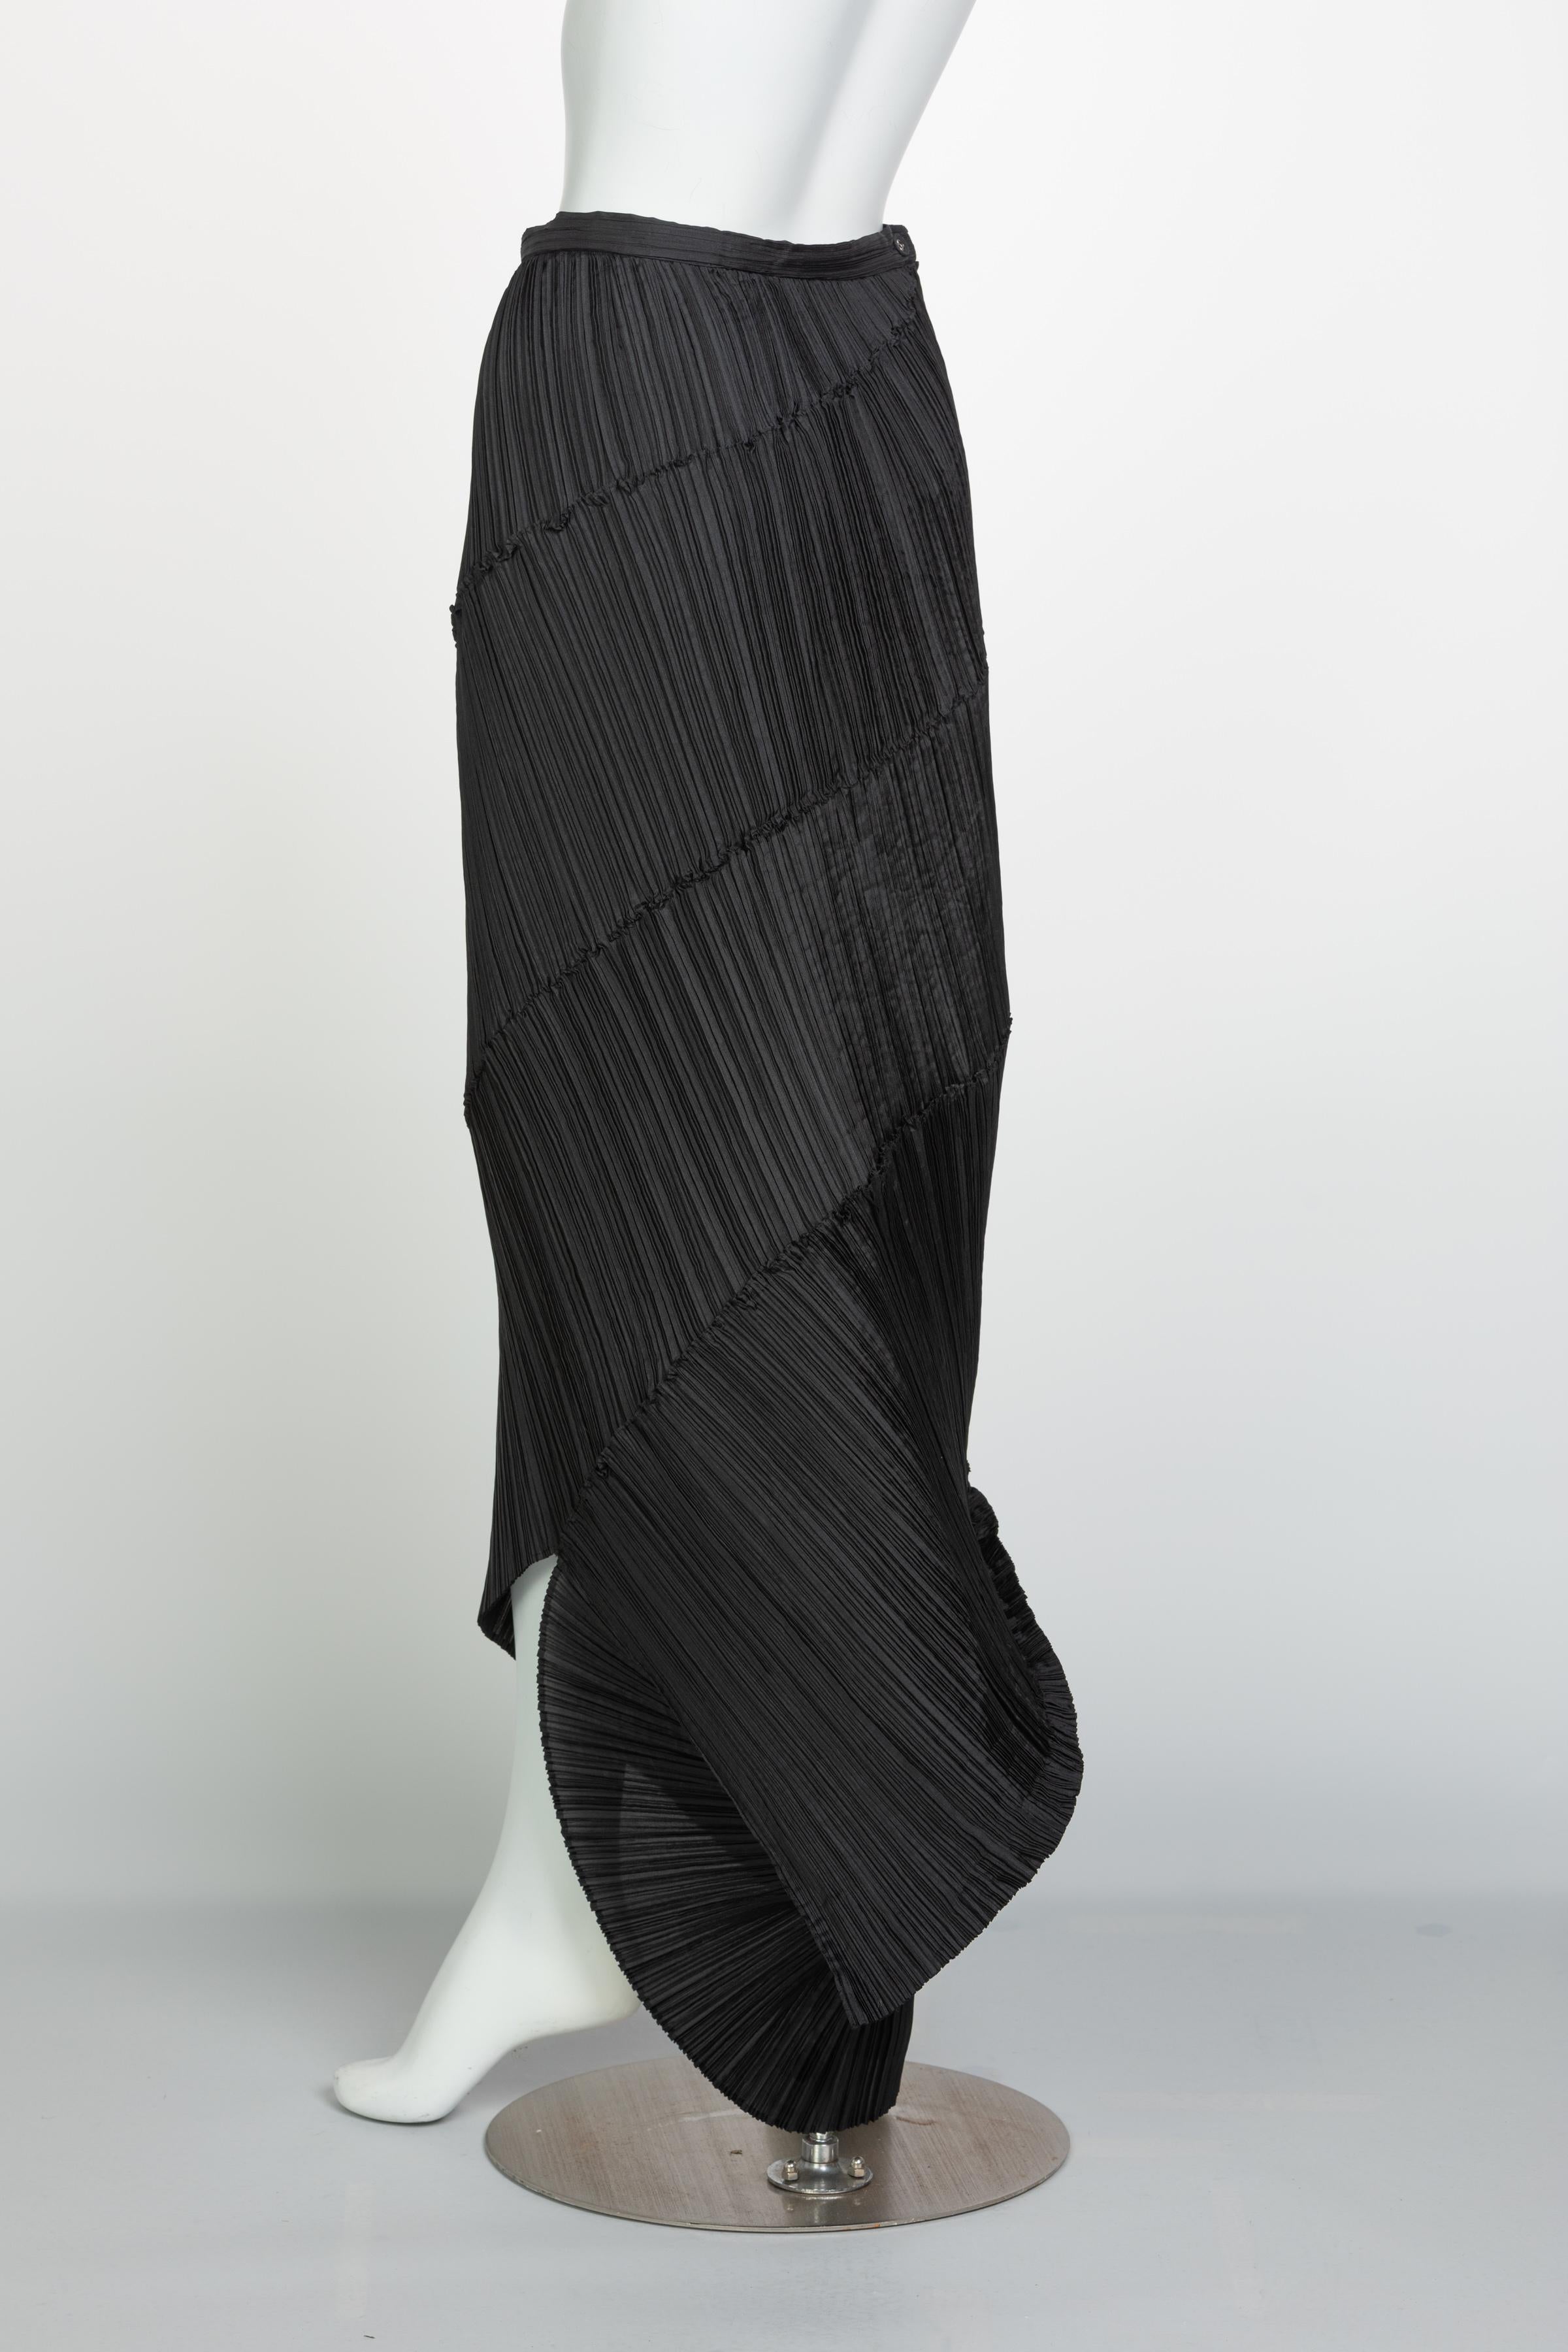 Issey Miyake Black Pleated Spiral Skirt, 1990s In Excellent Condition In Boca Raton, FL